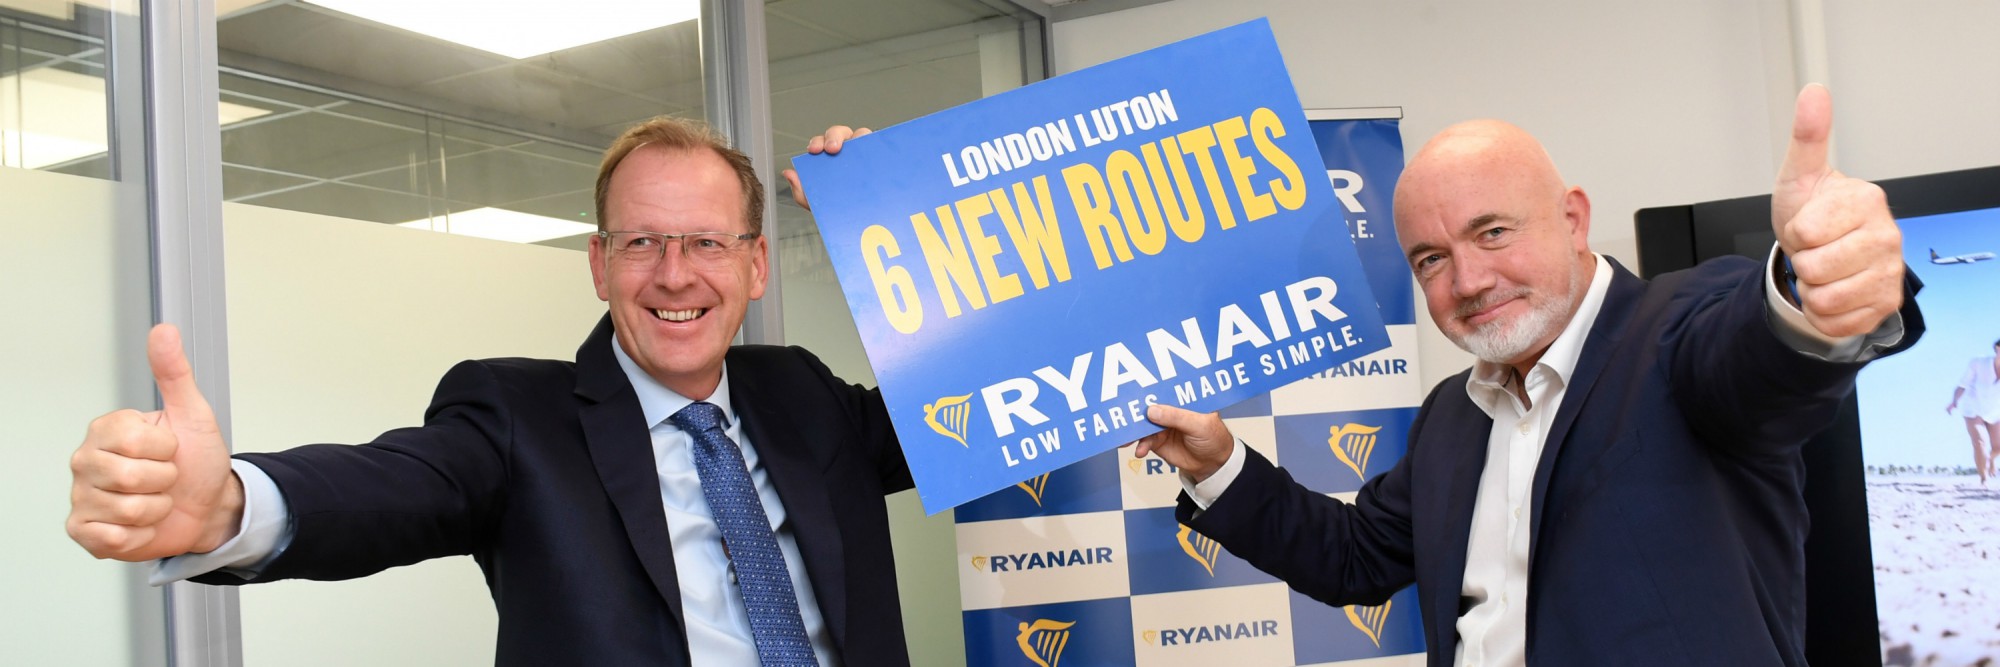 Ryanair Launches New Cork Route To London Luton